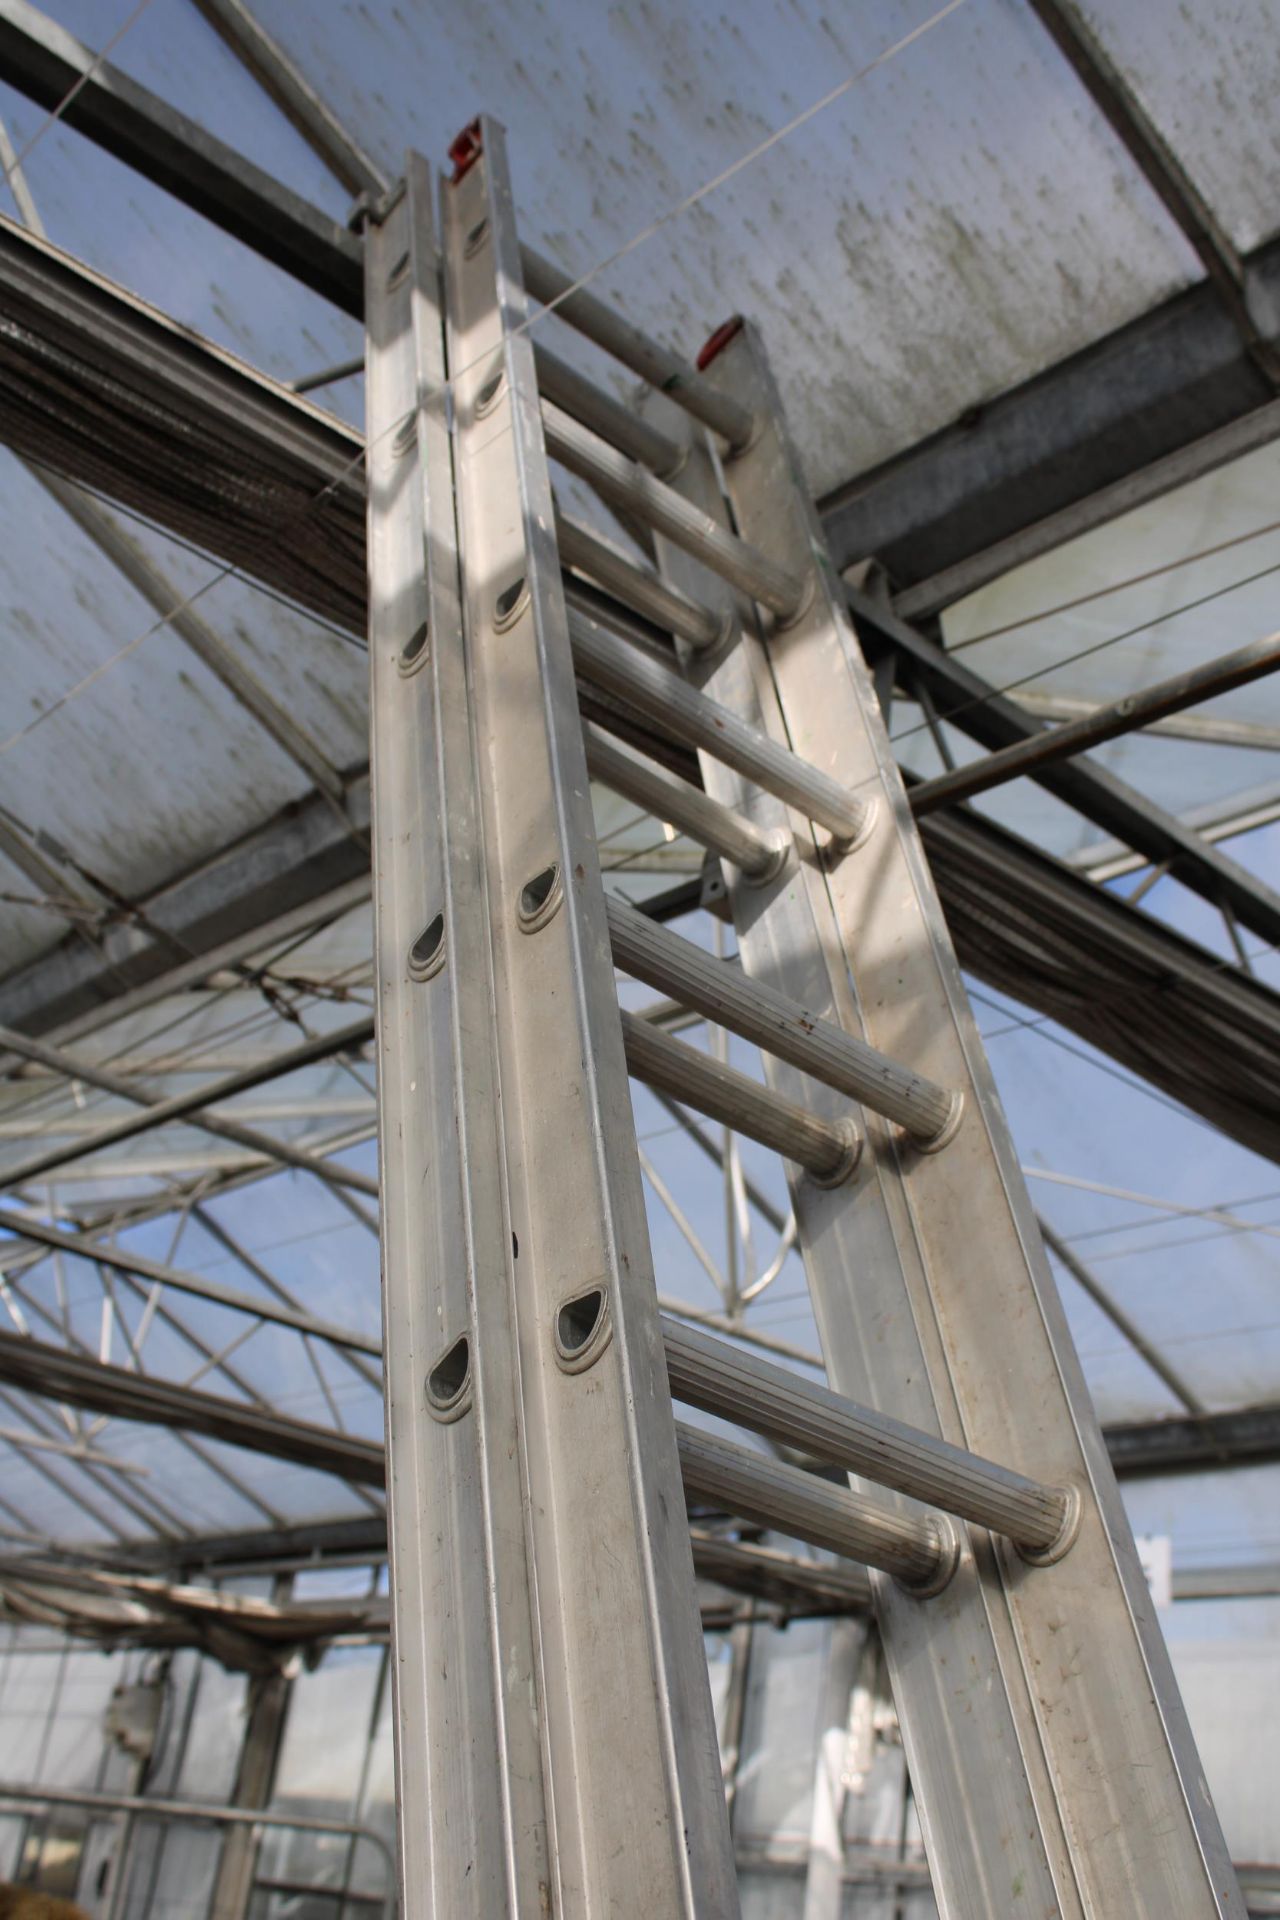 A 24 RUNG TWO SECTION ALUMINIUM EXTENDING LADDER - Image 2 of 2